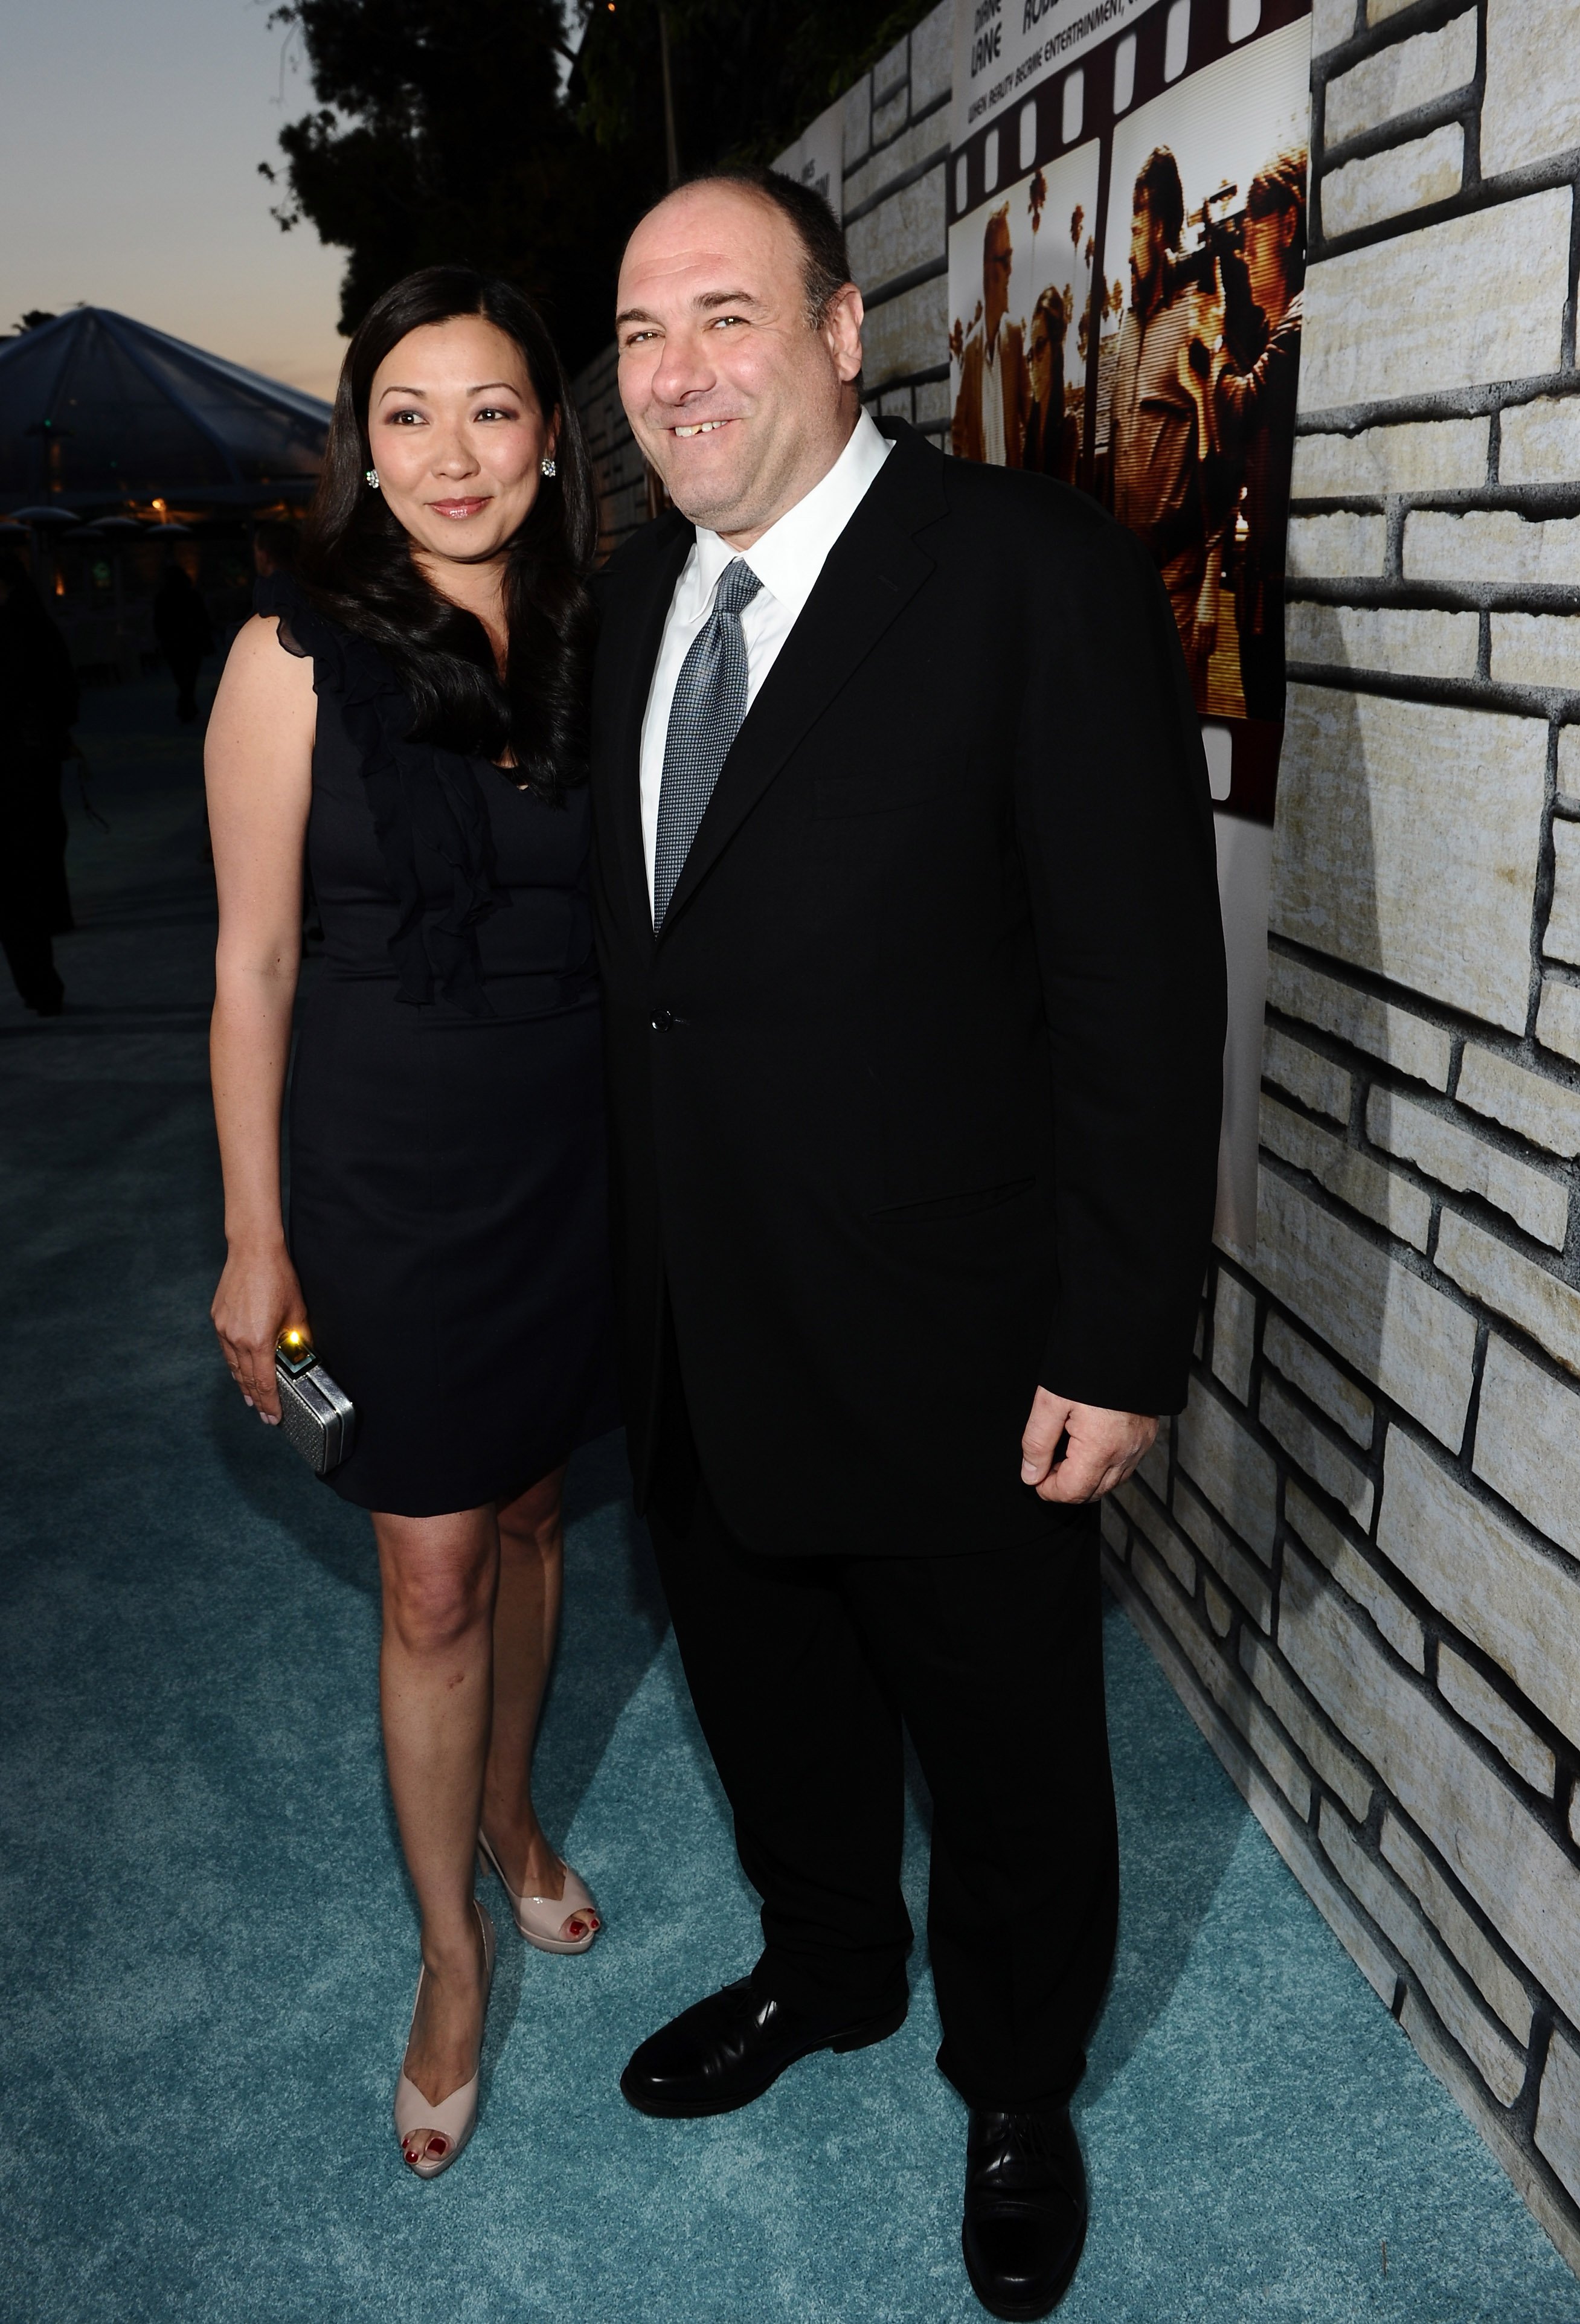 Deborah Lin and James Gandolfini arrive at the premiere of HBO Films' "Cinema Verite" at the Paramount Theatre on April 11, 2011, in Hollywood, California. | Source: Getty Images